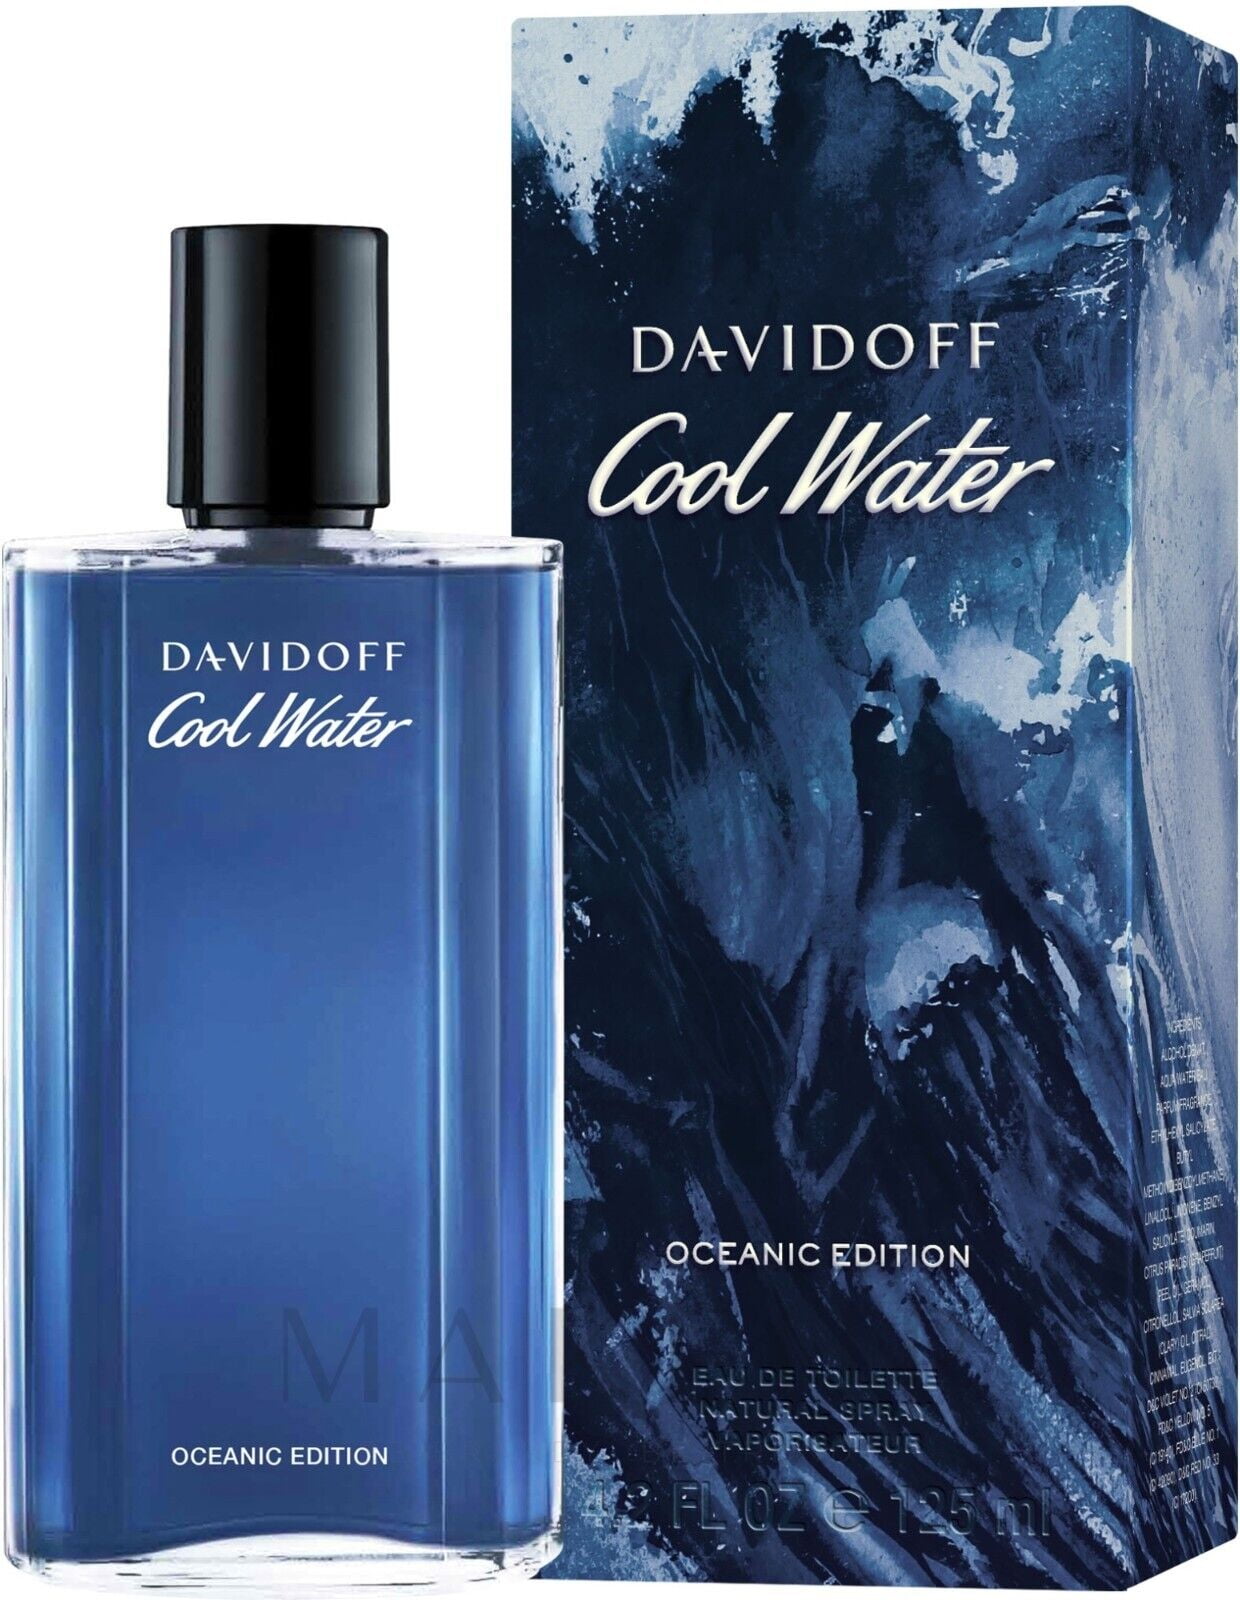 Cool Water for Men (6.7 oz.) - Sam's Club